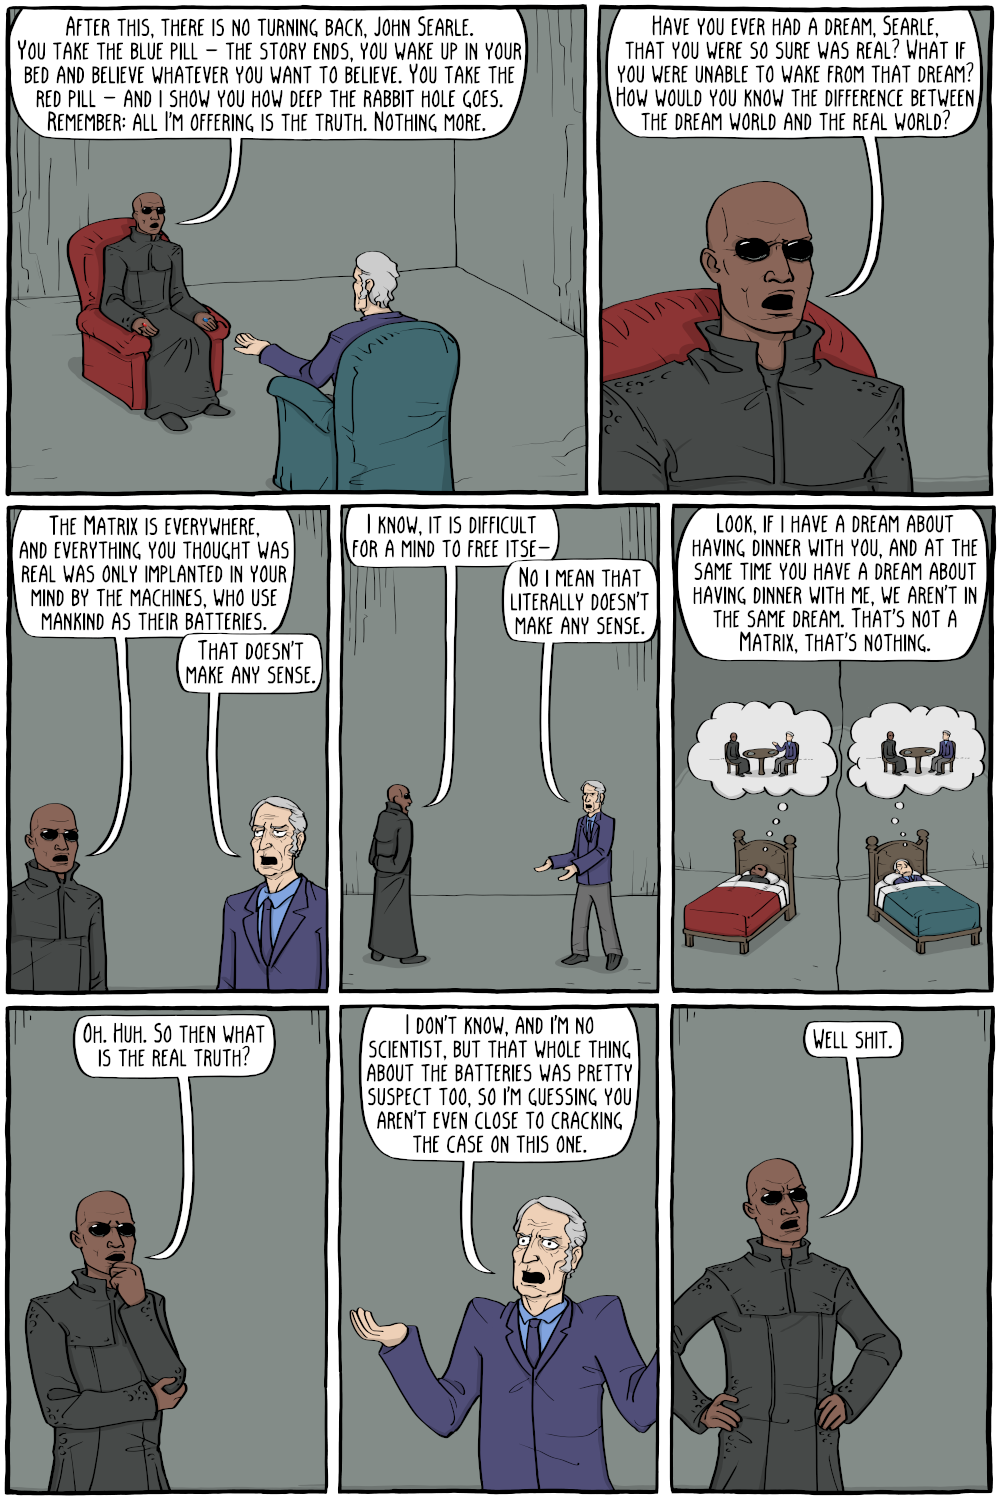 Morpheus: "After this, there is no turning back, John Searle. You take the blue pill - the story ends, you wake up in your bed and believe whatever you want to believe. You take the red pill - and i show you how deep the rabbit hole goes. Remember: all I'm offering is the truth. Nothing more."

Morpheus: "Have you ever had a dream, Searle, that you were so sure was real? What if you were unable to wake from that dream? How would you know the difference between the dream world and the real world?"

Morpheus: "The Matrix is everywhere, and everything you thought was real was only implanted in your mind by the machines, who use mankind as their batteries."
John Searle: "That doesn't make any sense."

Morpheus: "I know, it is difficult for a mind to free itse-"
John Searle: "No i mean that literally doesn't make any sense."

John Searle: "Look, if I have a dream about having dinner with you, and at the same time you have a dream about having dinner with me, we aren't in the same dream. That's not a Matrix, that's nothing."

Morpheus: "Oh. Huh. So then what is the real truth?"

John Searle: "I don't know, and I'm no scientist, but that whole thing about the batteries was pretty suspect too, so I'm guessing you aren't even close to cracking the case on this one."

Morpheus: "Well shit."
